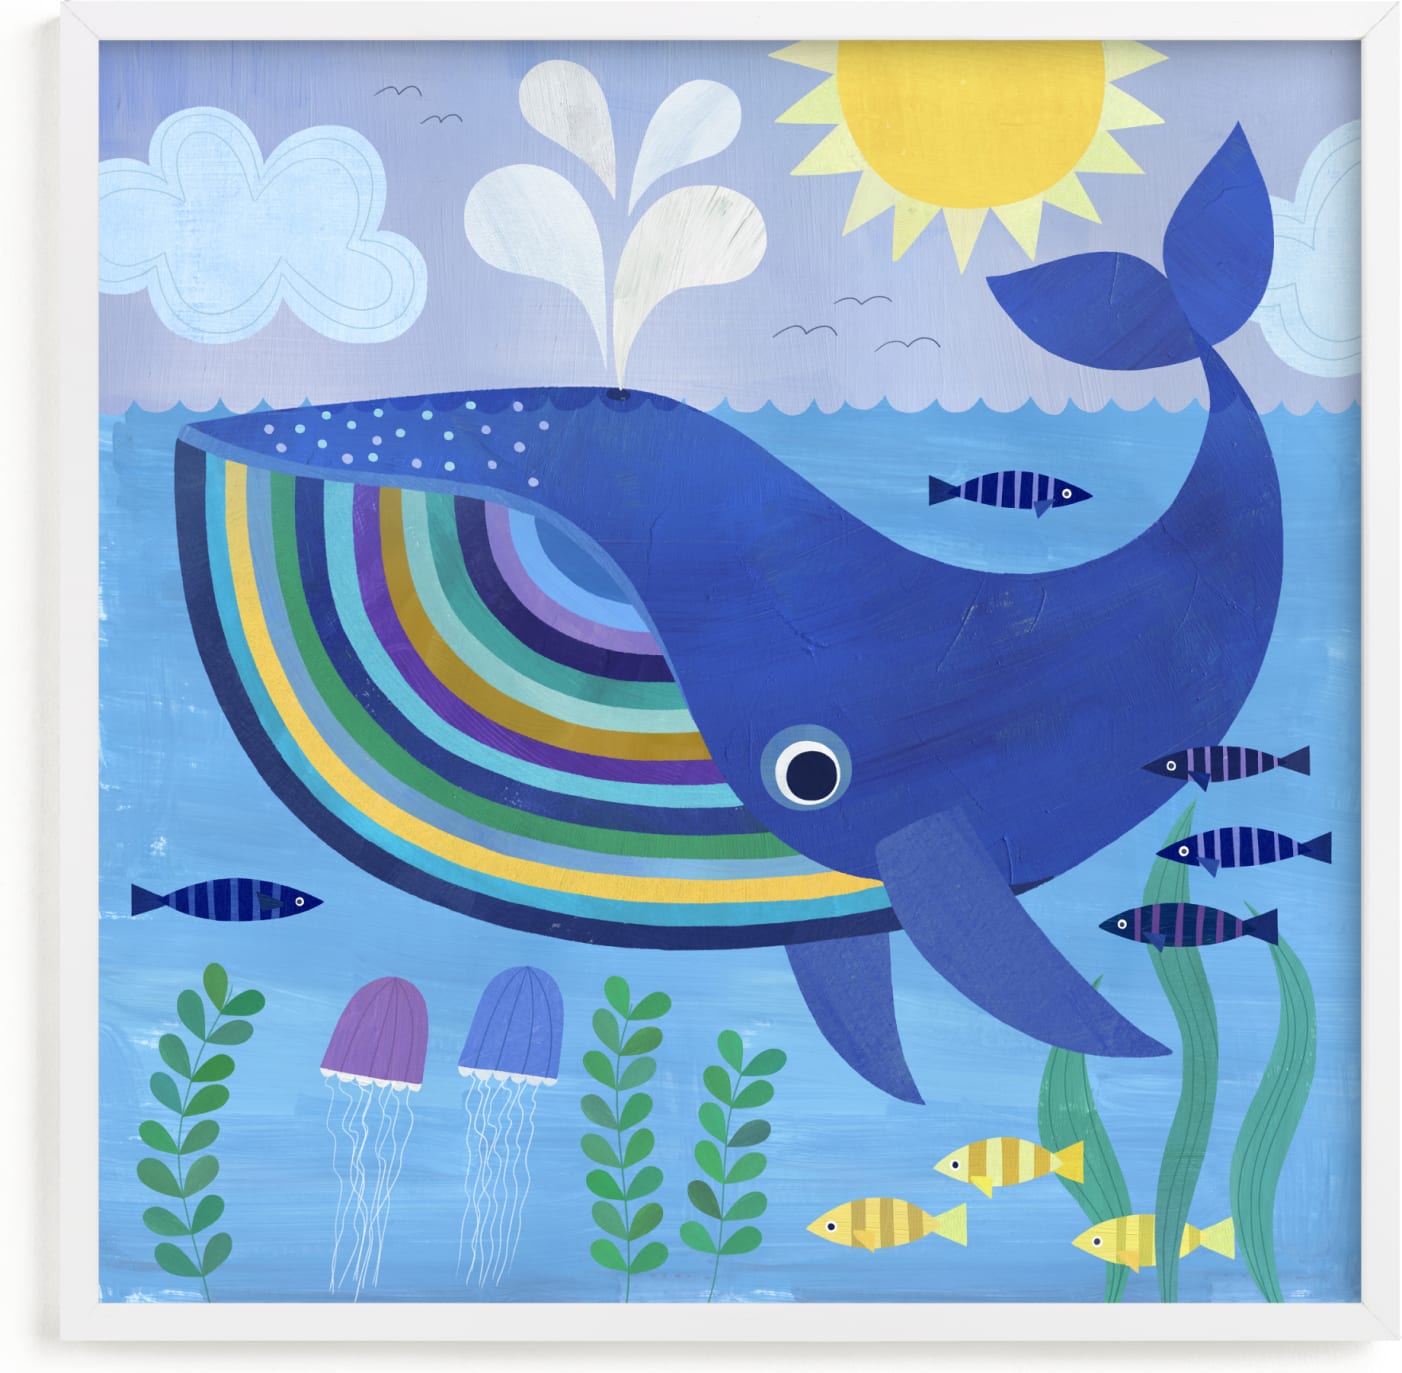 This is a blue kids wall art by melanie mikecz called Little Blue Whale.